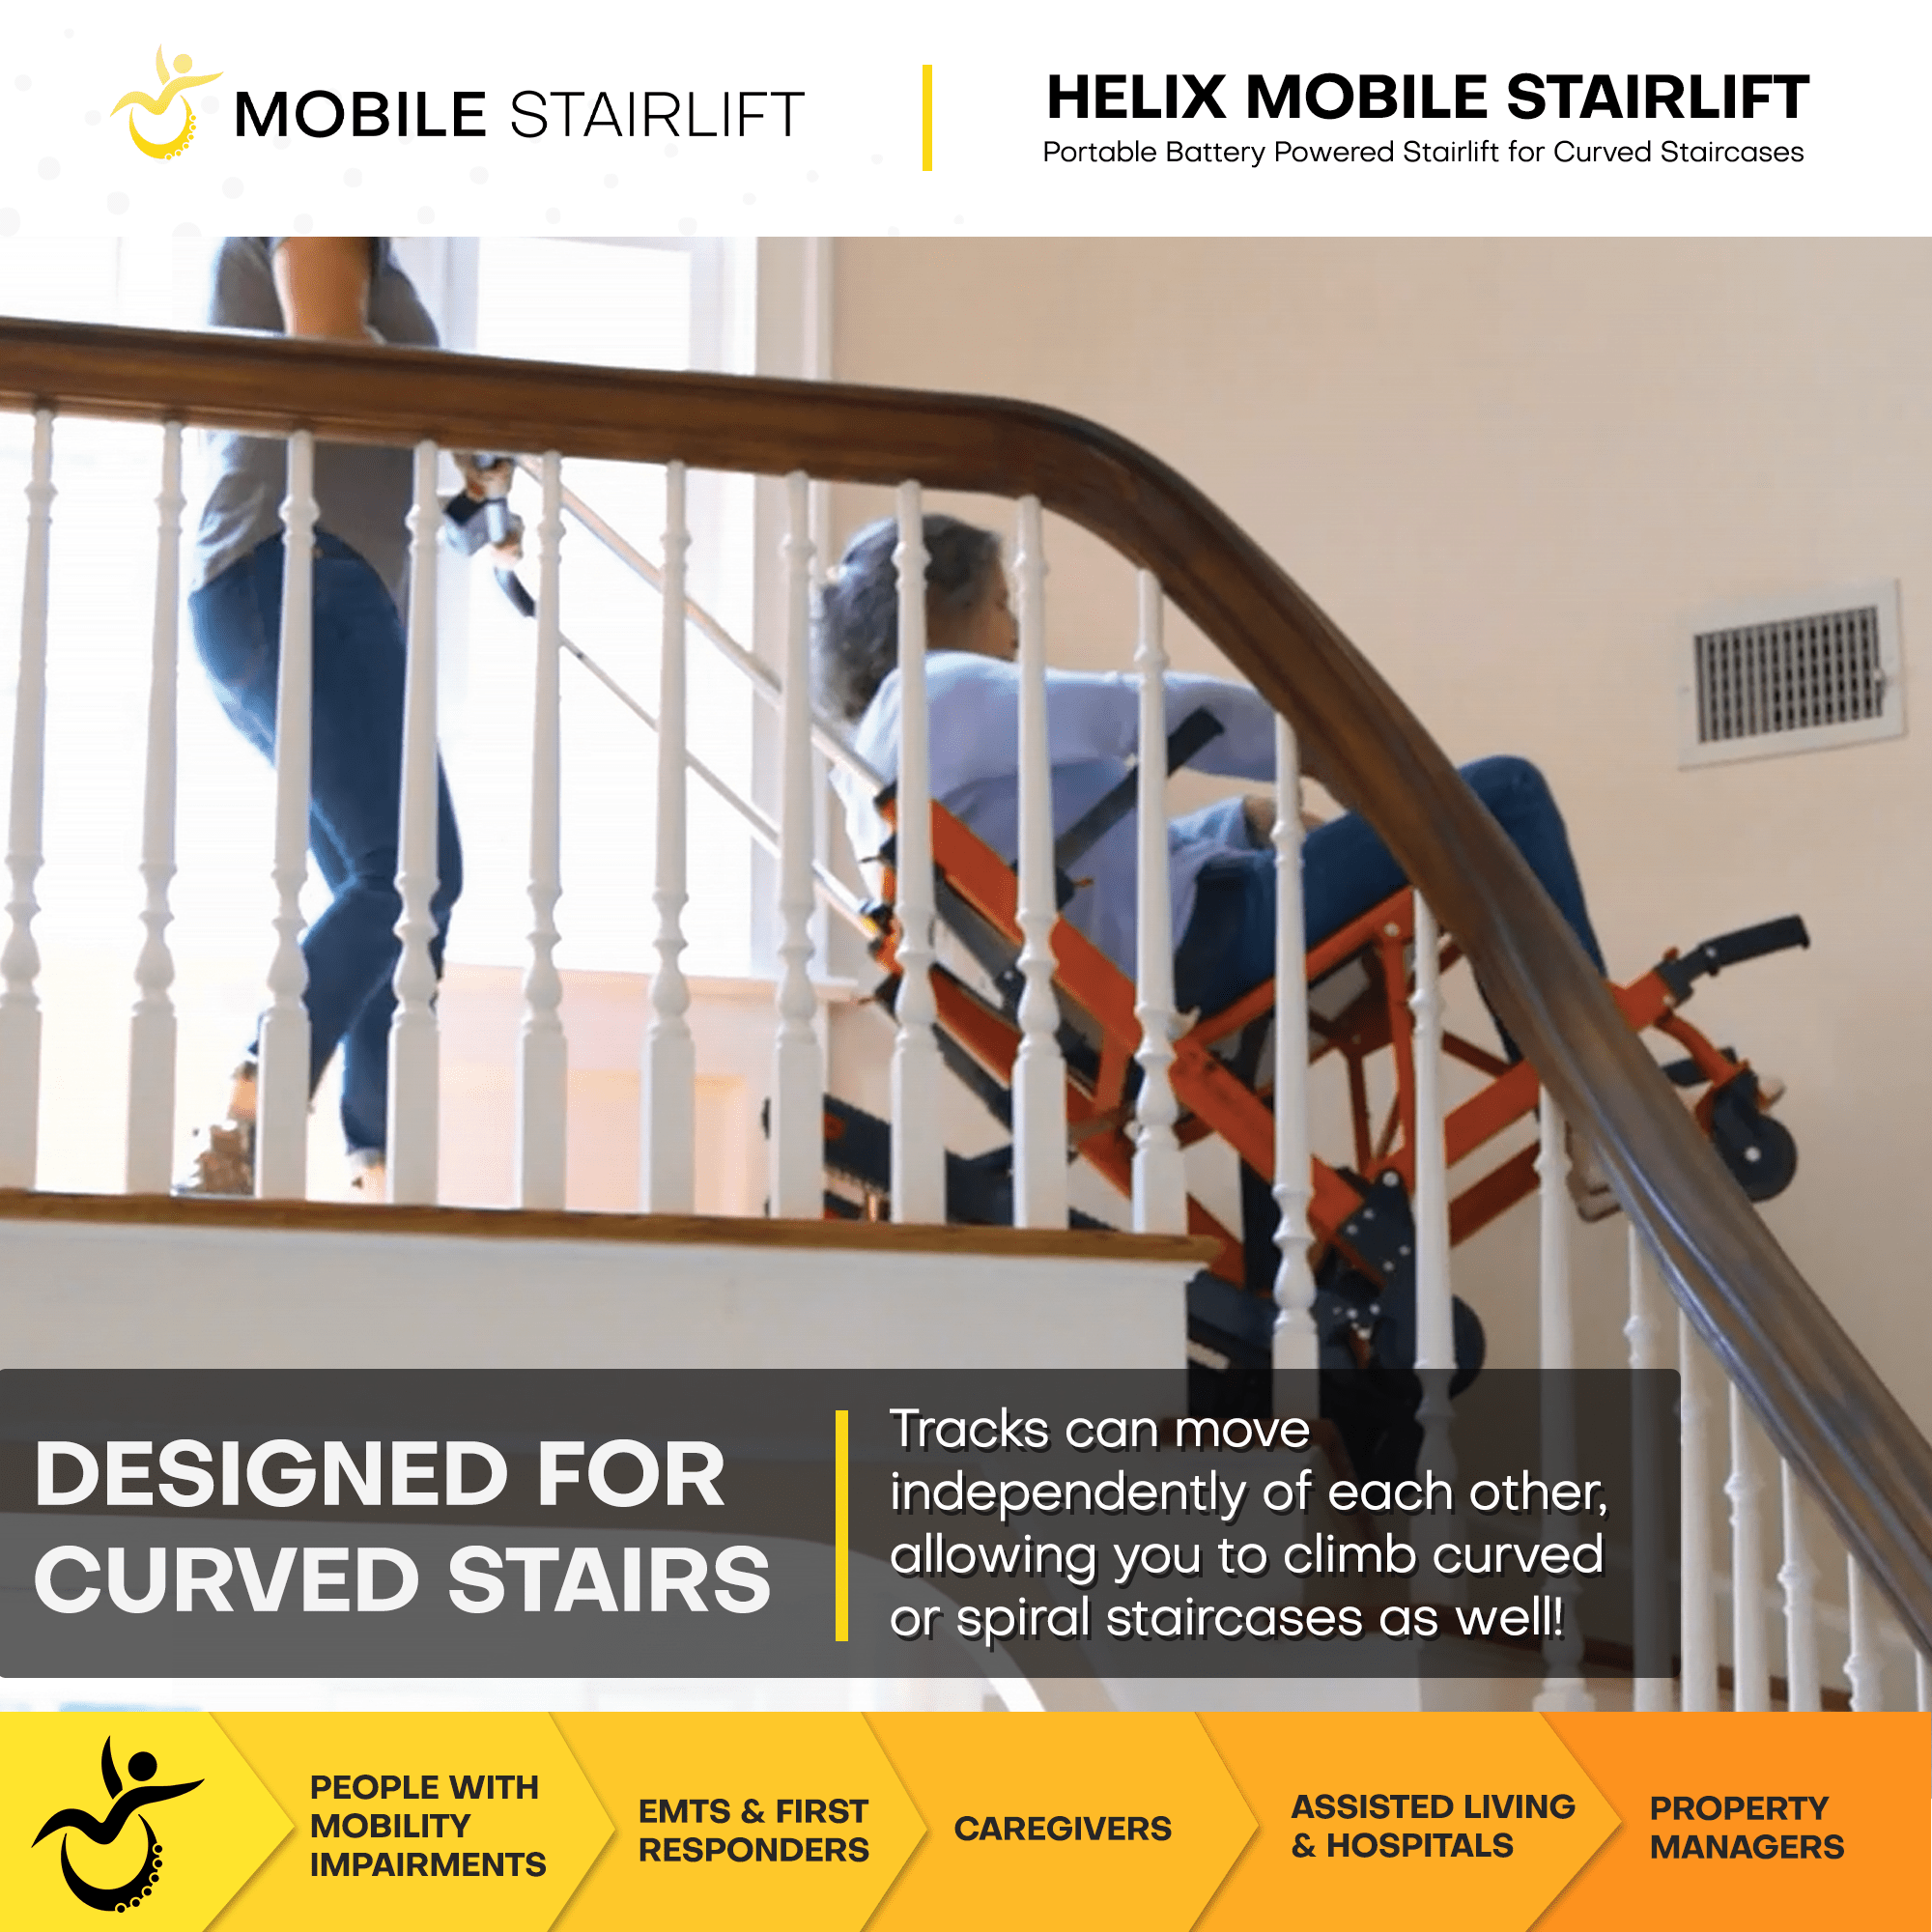 Mobile Stairlift Helix - Battery Powered & Portable Round Stair Chair -  Minor Cosmetic Defects